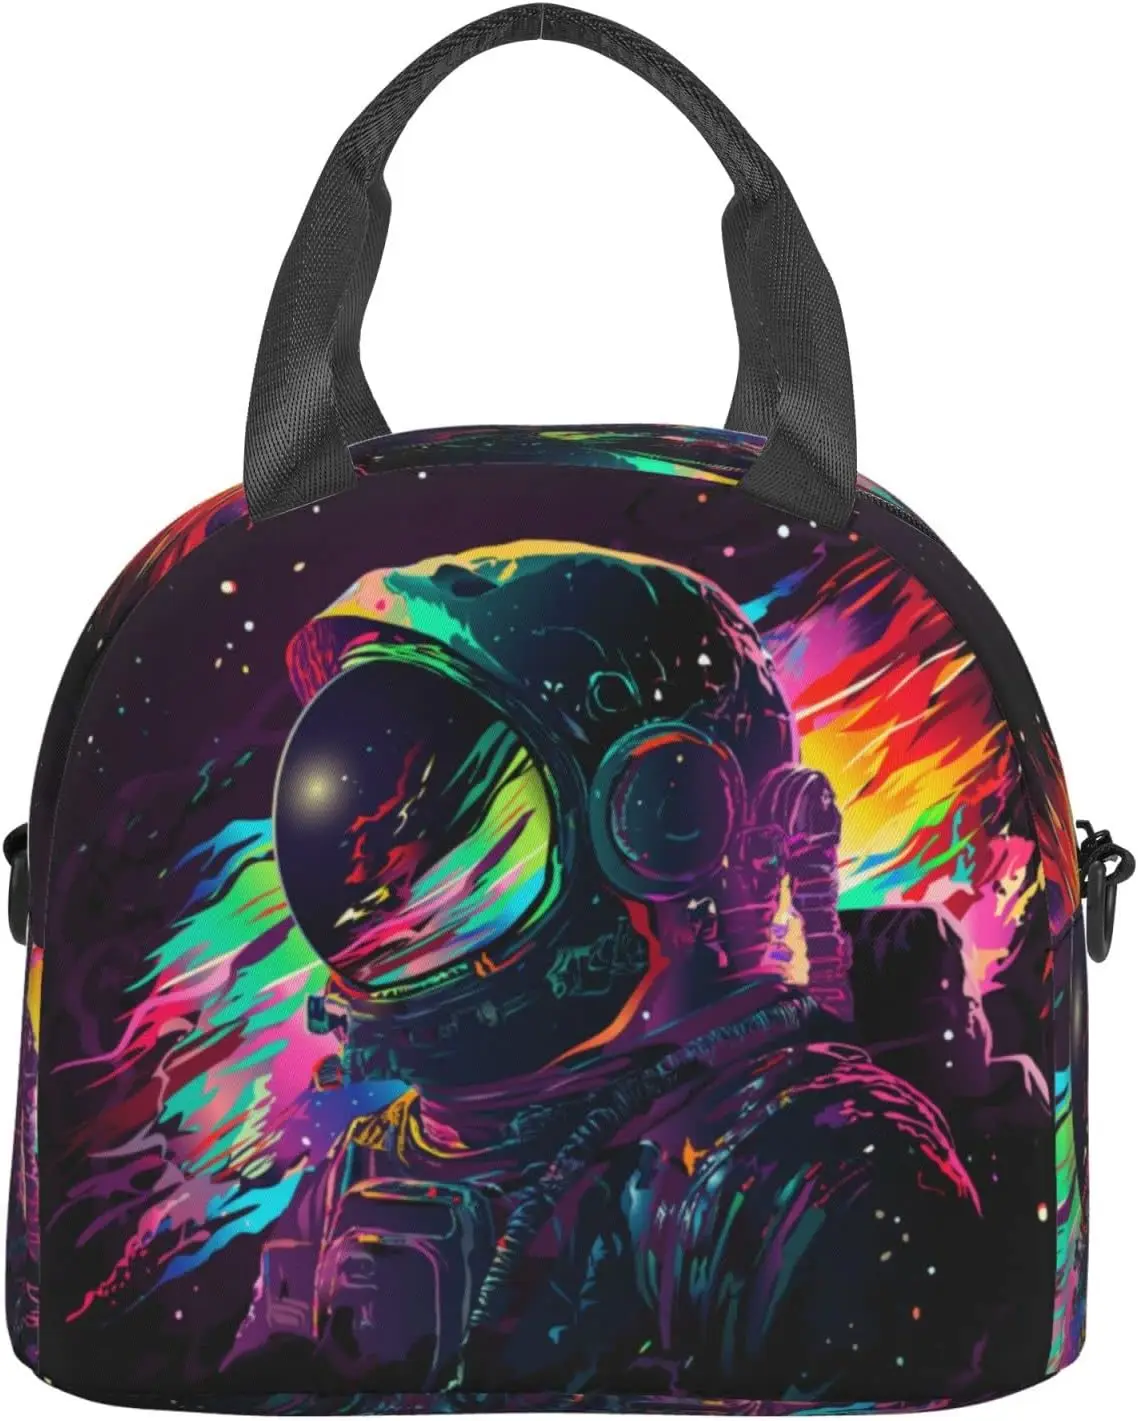 Astronaut Colorful Insulated Lunch Bag with Straps for Women and Men, Waterproof Tote Bag for Office and Travel